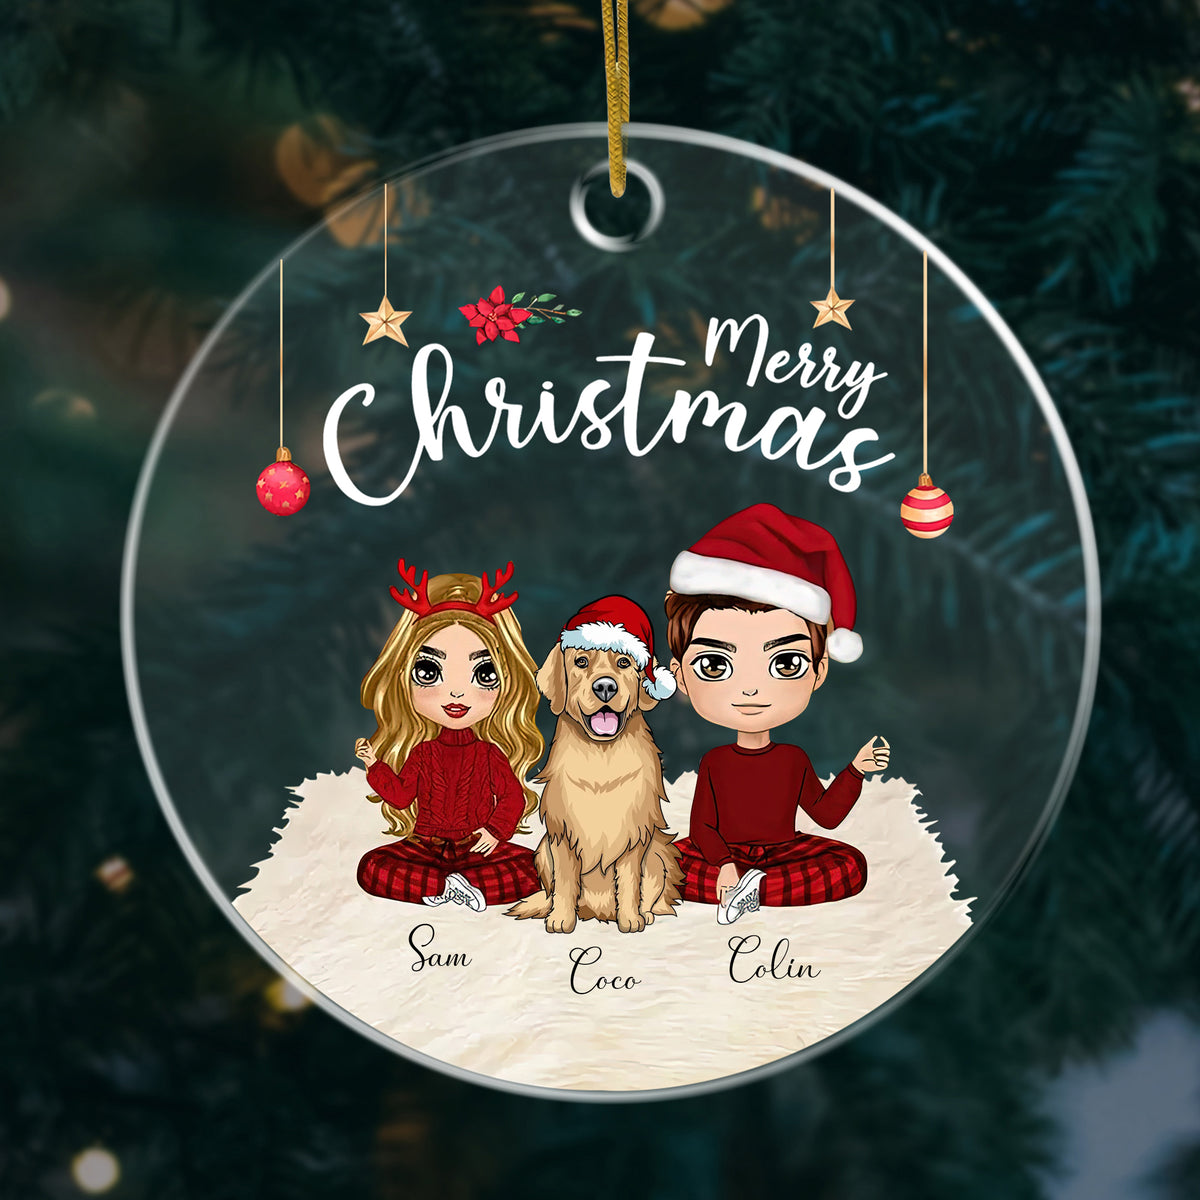 Customize Couples Ornament With Pets - 2022 Christmas Ornaments